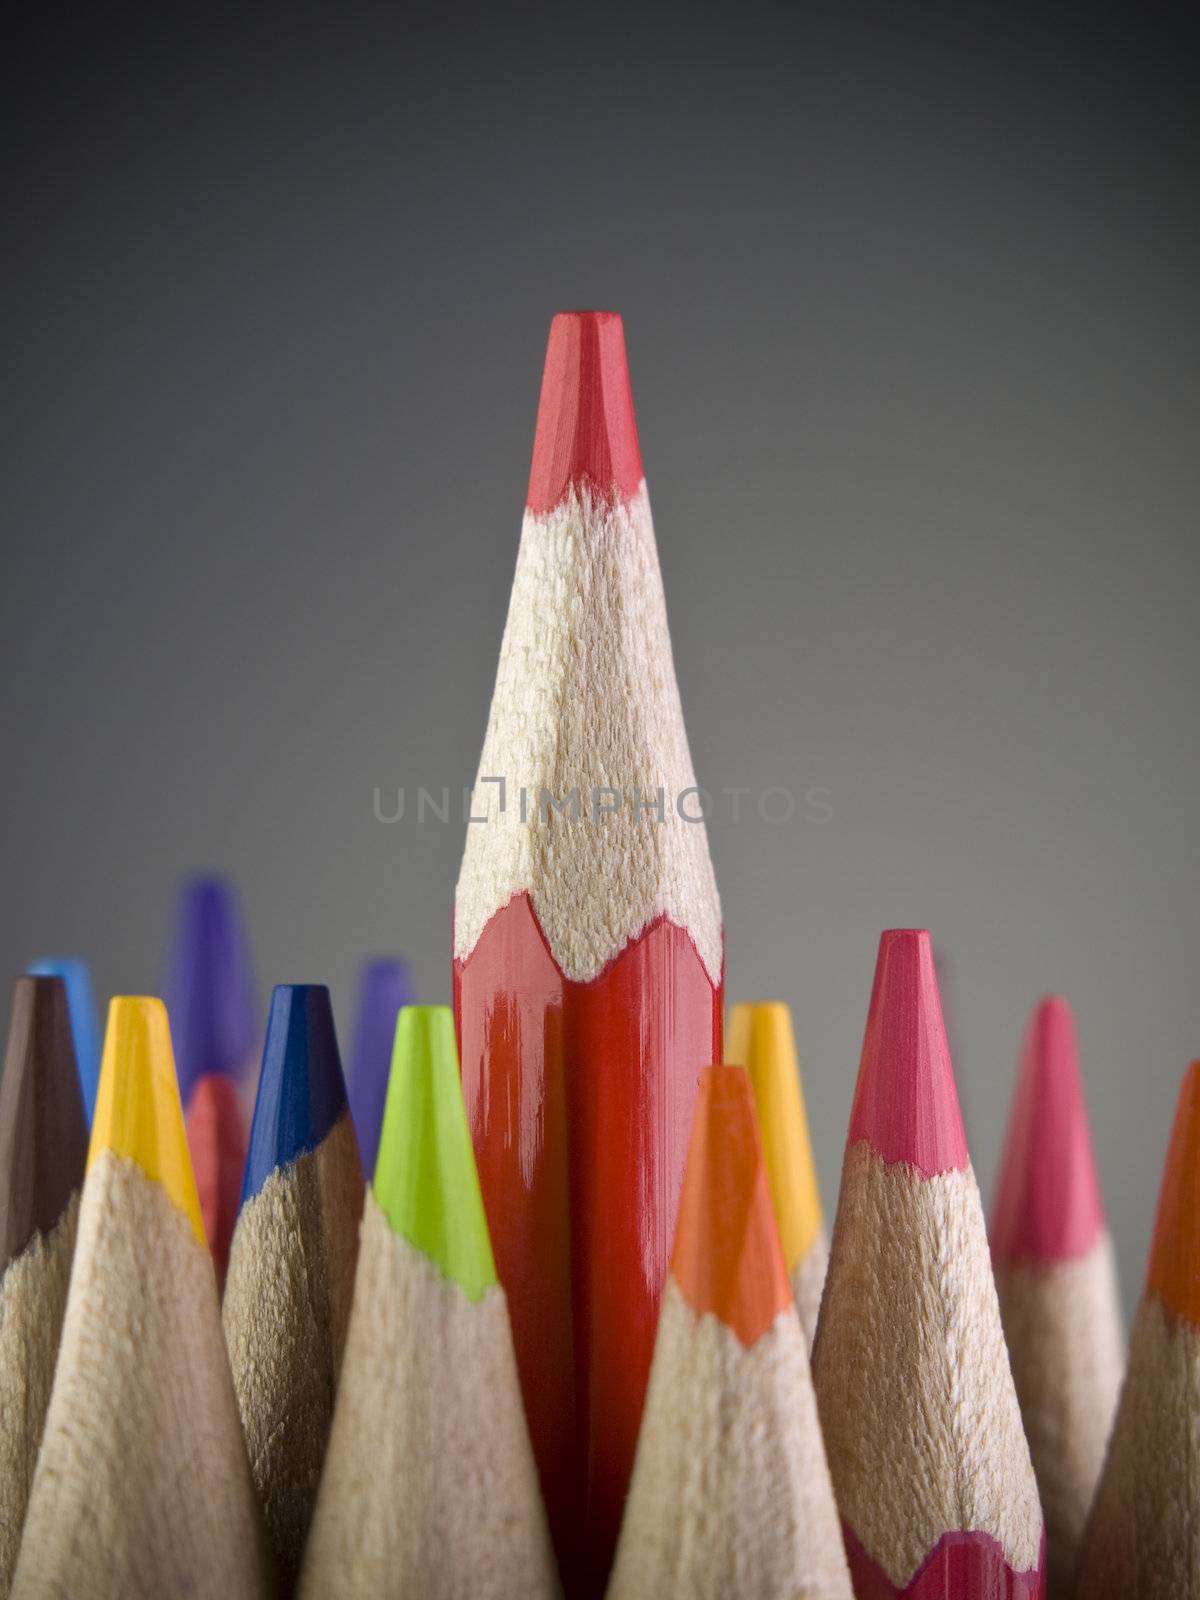 Red pencil coming out among many colored pencils.